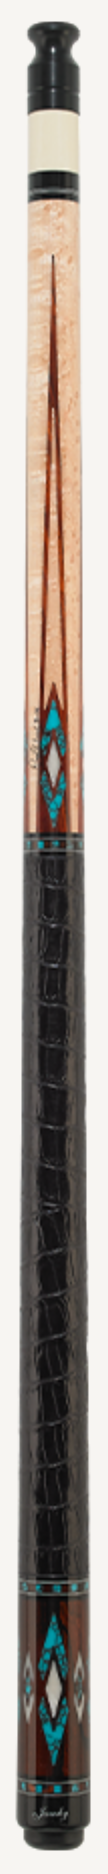 Jacoby Jacoby JCB05 Pool Cue Pool Cue